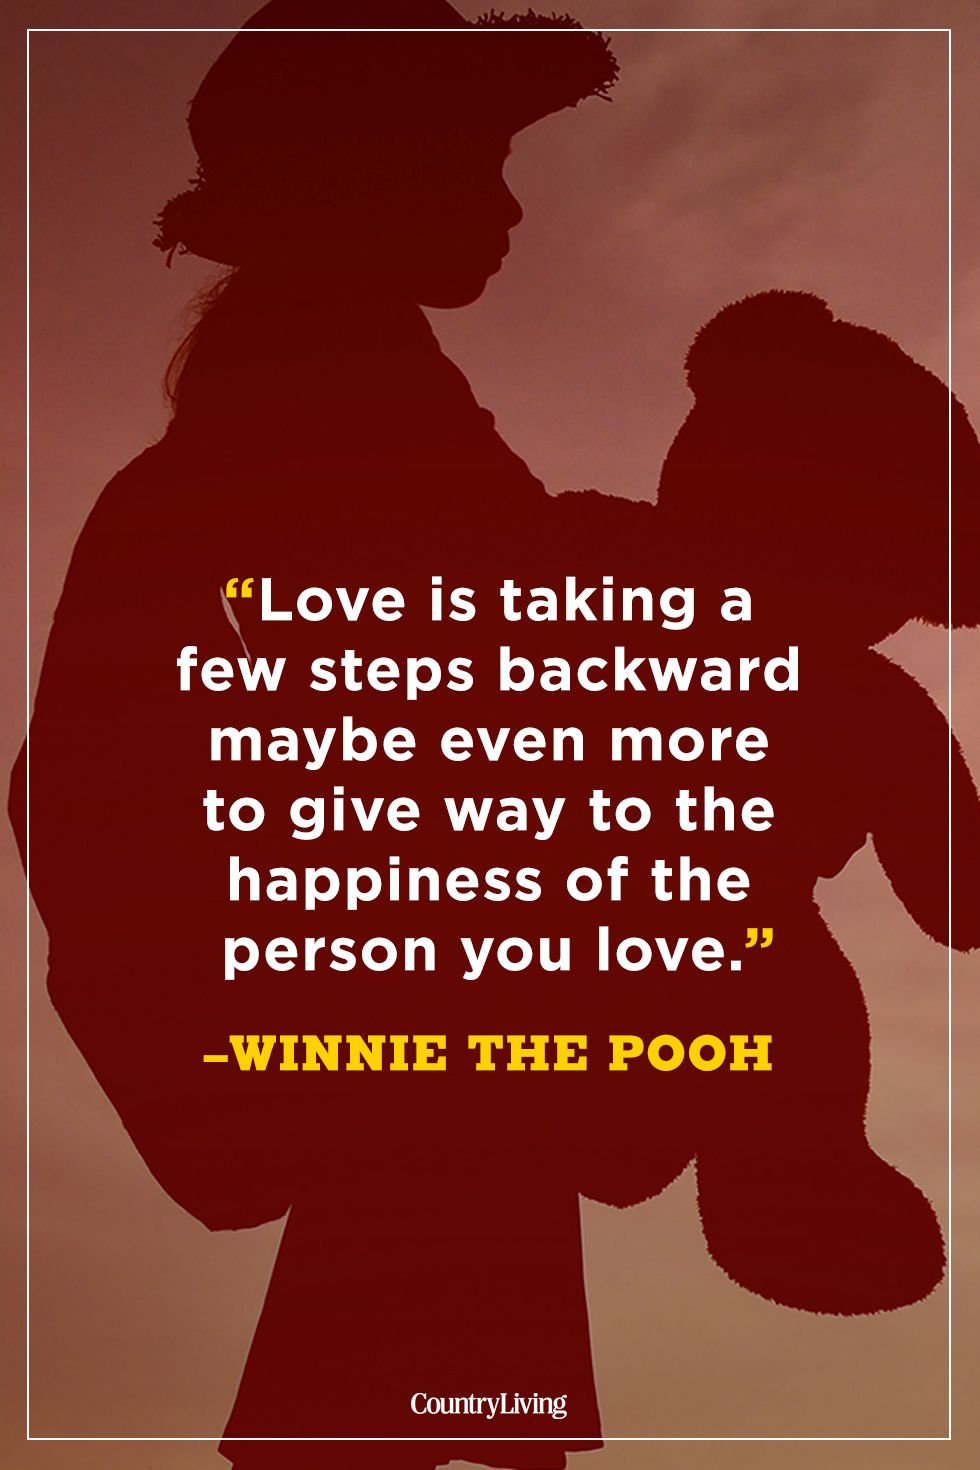 winnie the pooh quotes about love and friendship